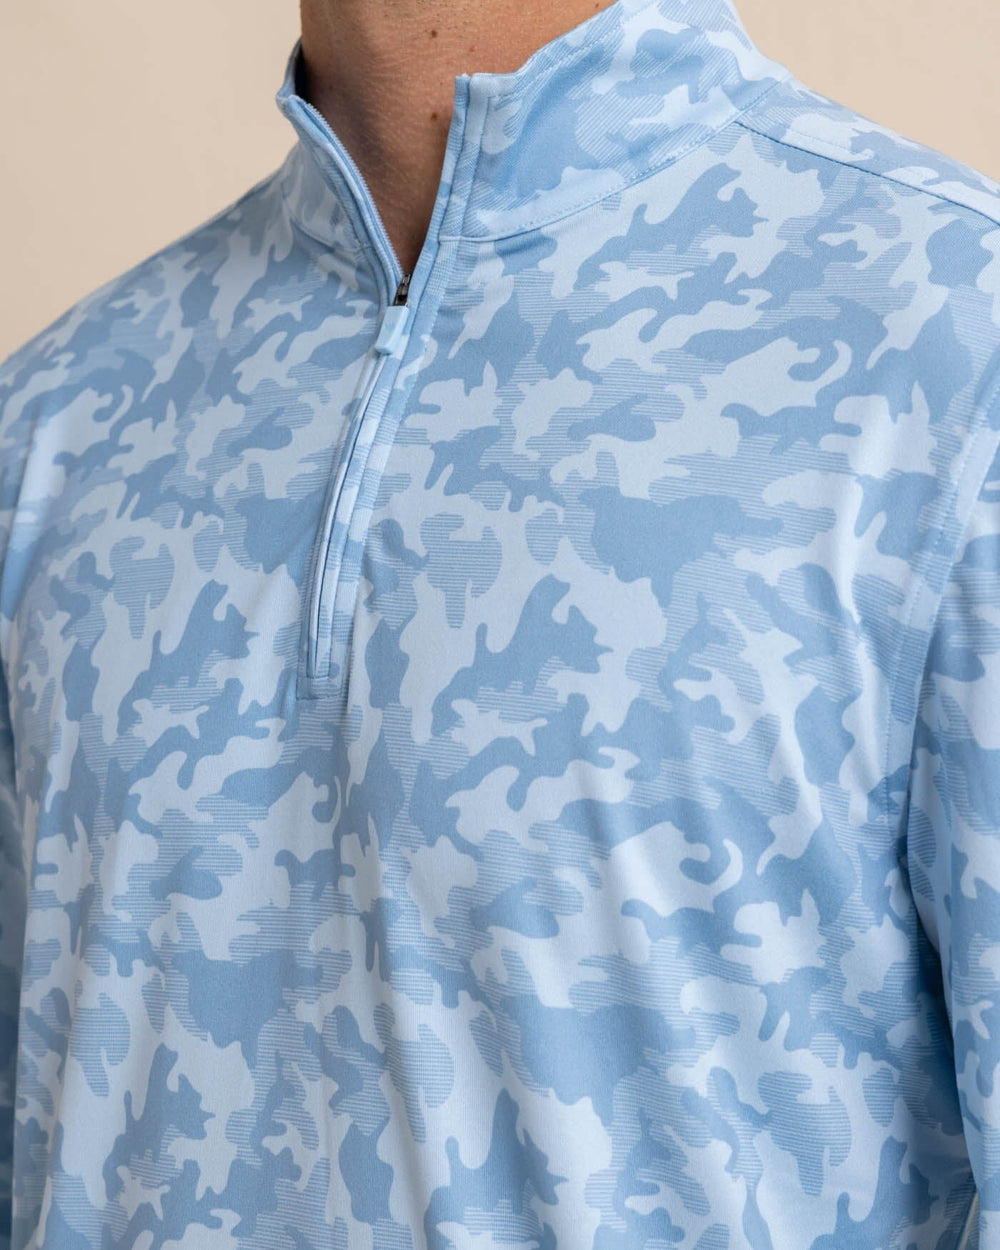 The detail view of the Southern Tide Island Camo Print Cruiser Quarter Zip by Southern Tide - Clearwater Blue